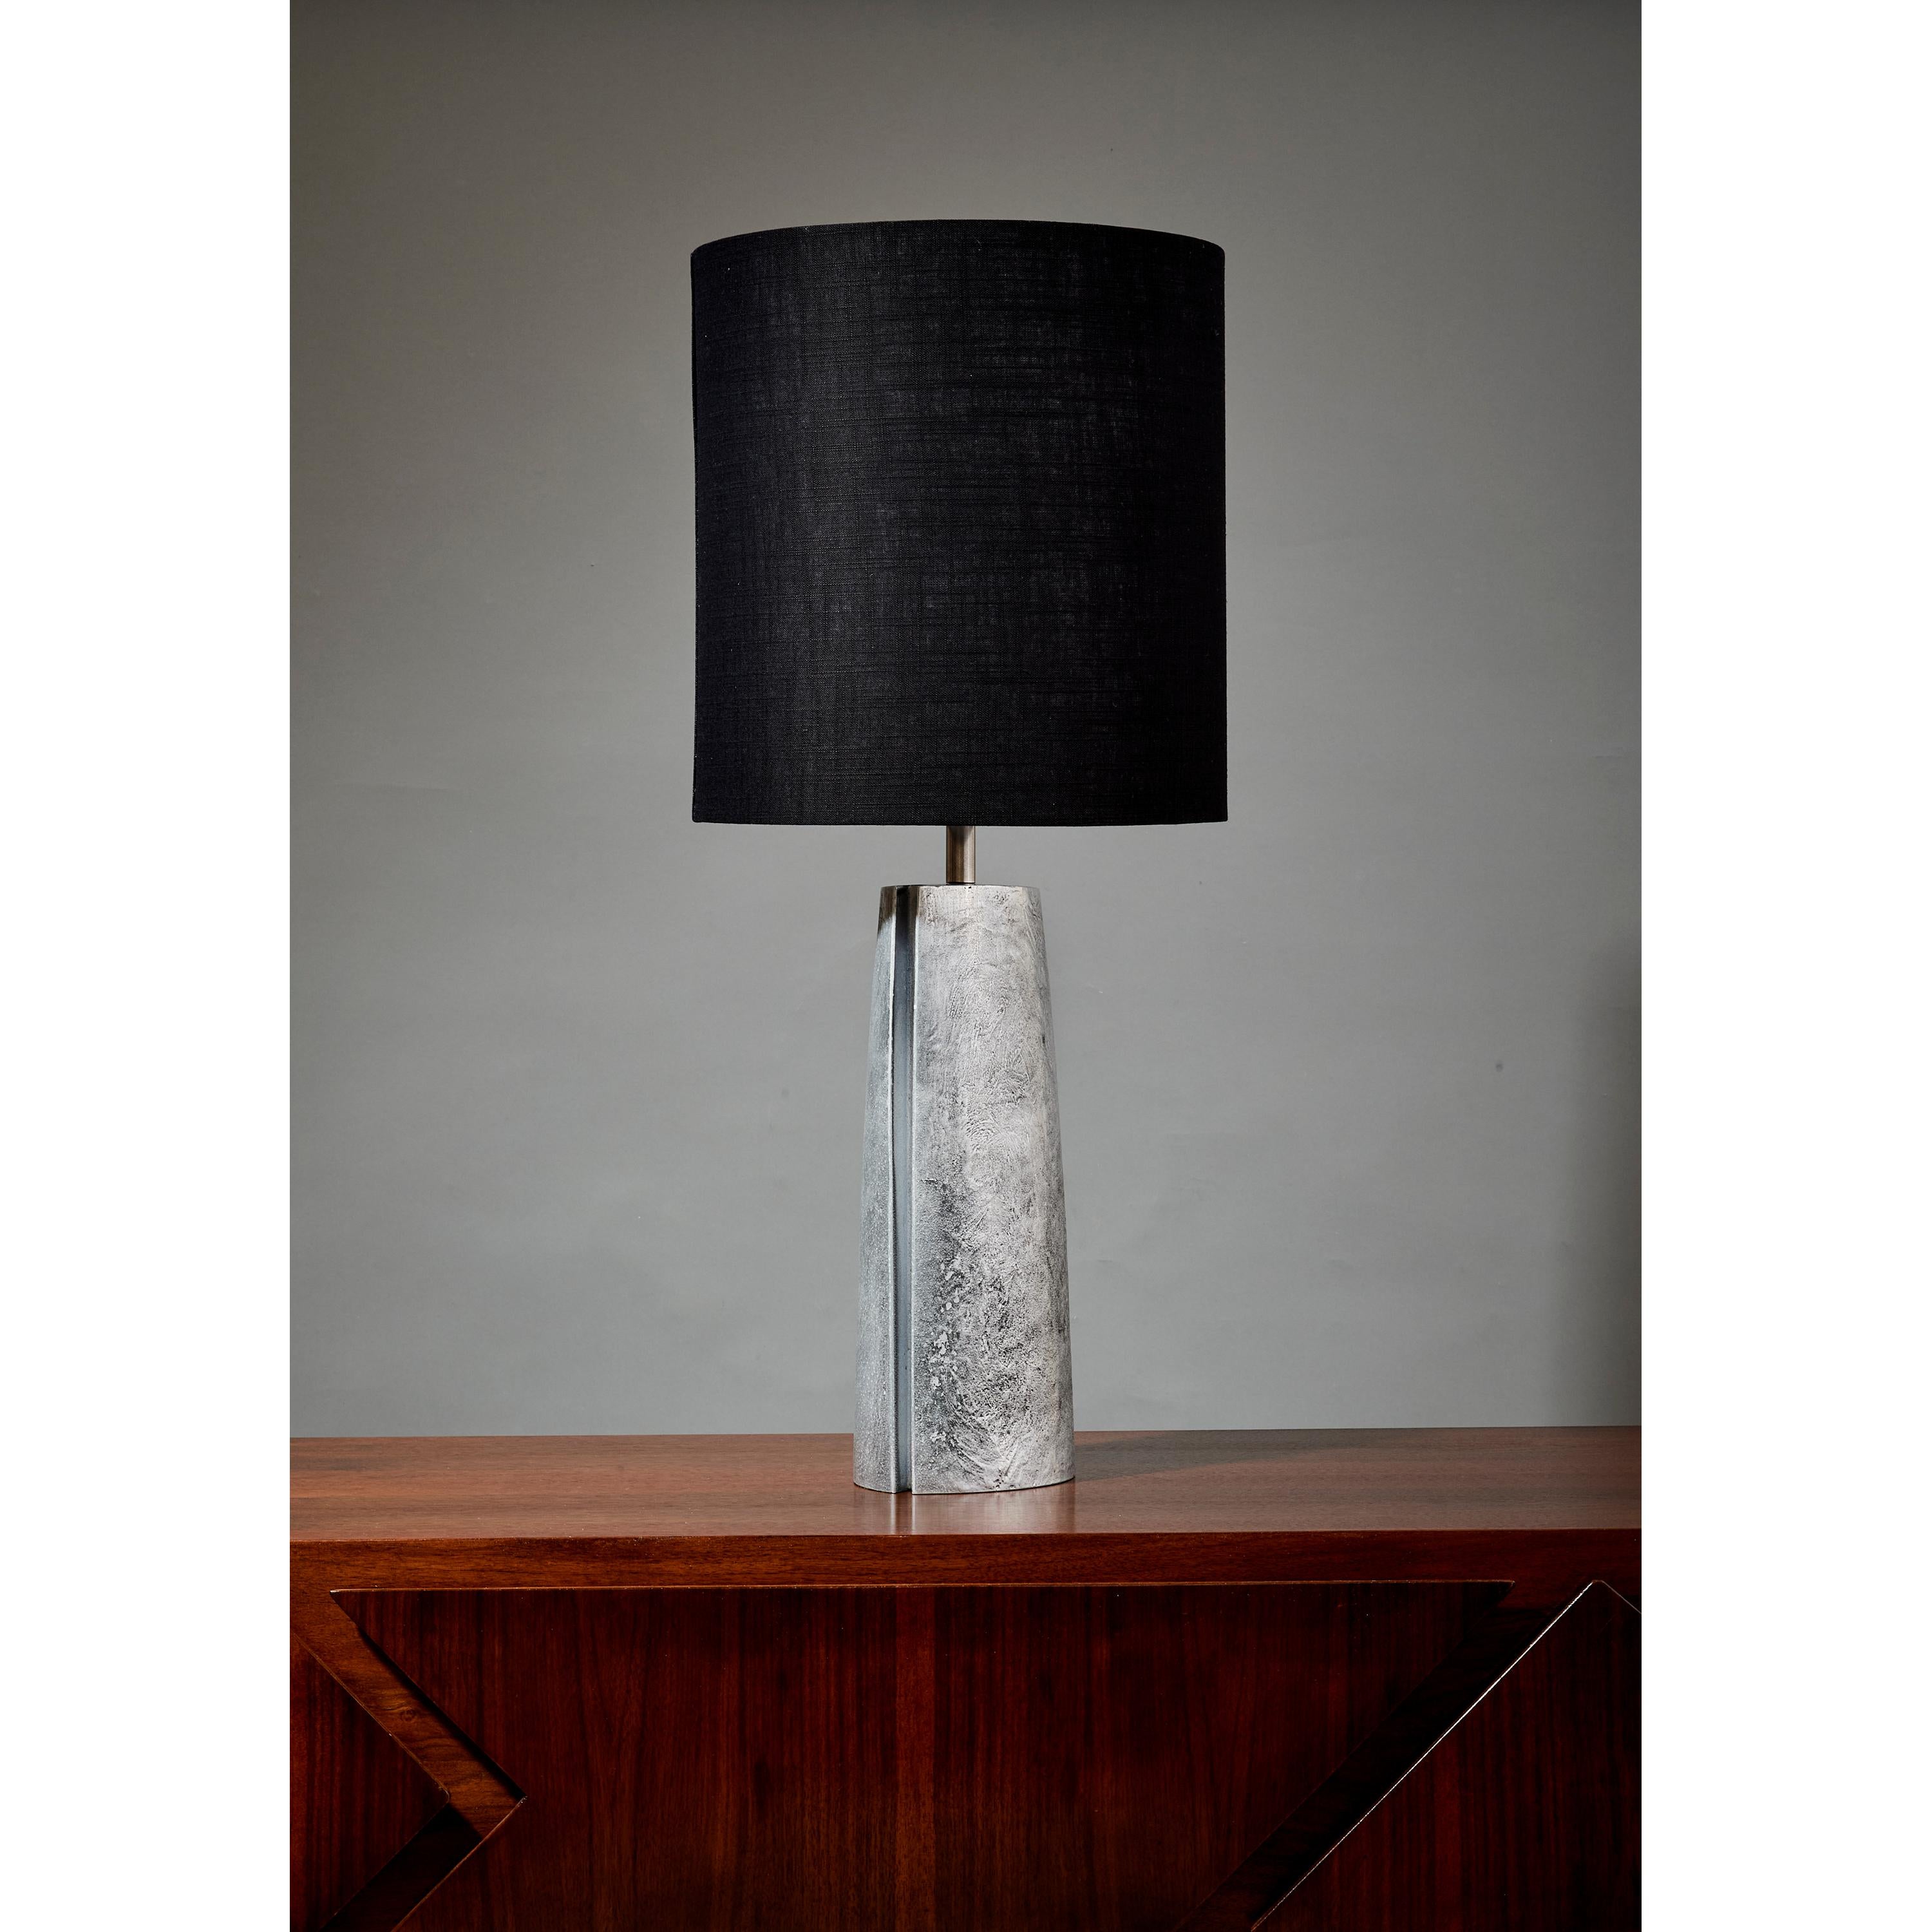 Late 20th Century Brutalist Table Lamp in Silver Textured Aluminium with Black Shade, Italy 1970's For Sale